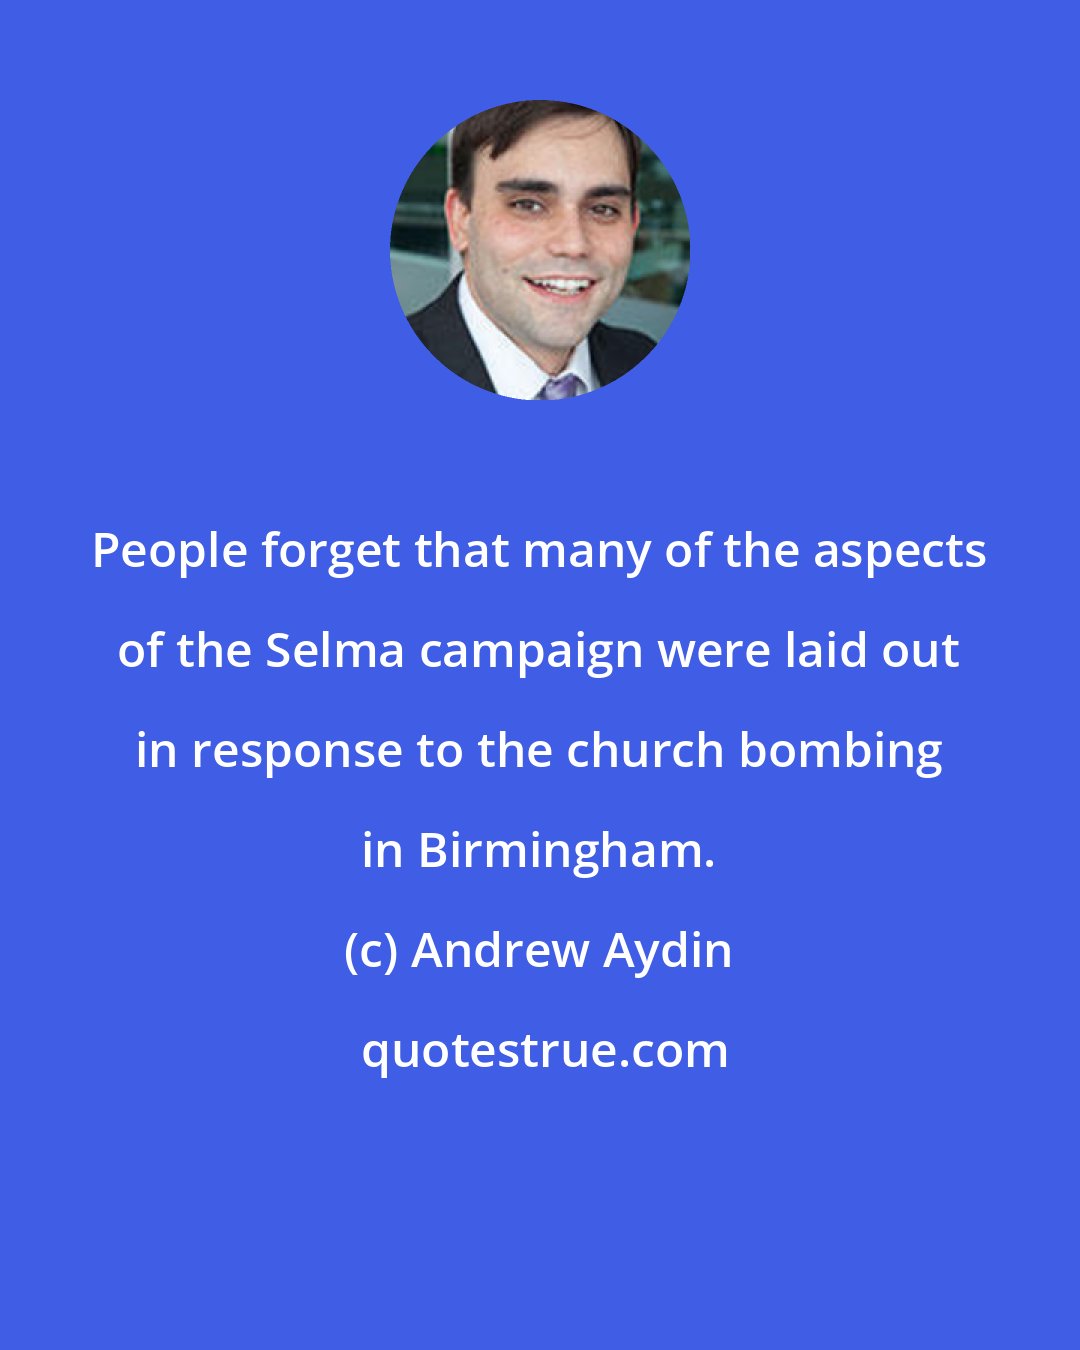 Andrew Aydin: People forget that many of the aspects of the Selma campaign were laid out in response to the church bombing in Birmingham.